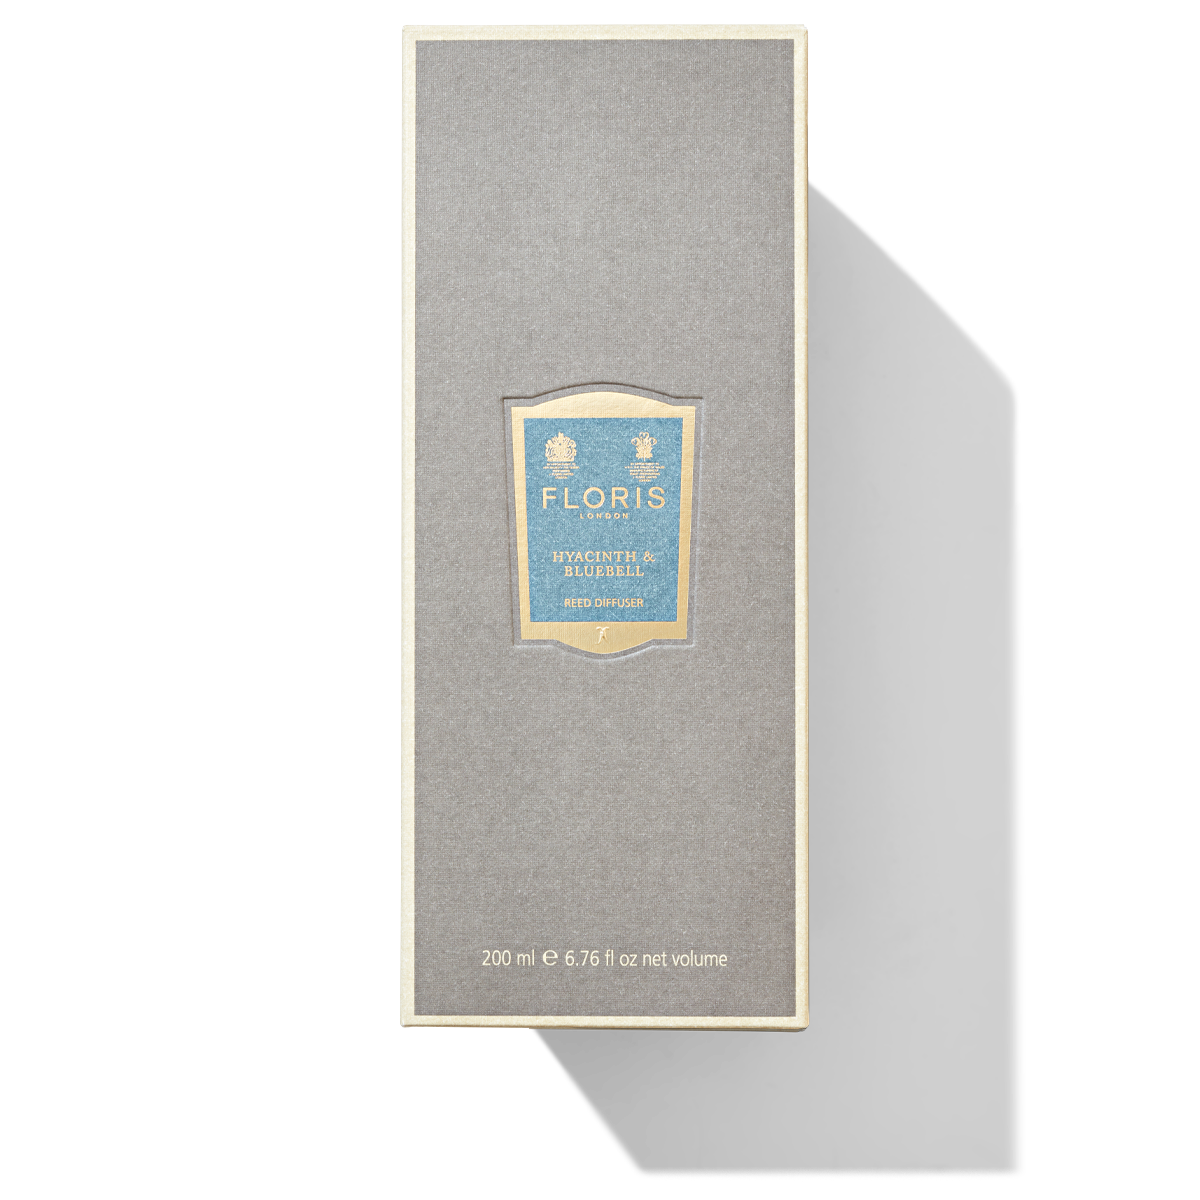 Grey packaging box for the Hyacinth and bluebell reed diffuser with blue and gold labelling on the front.